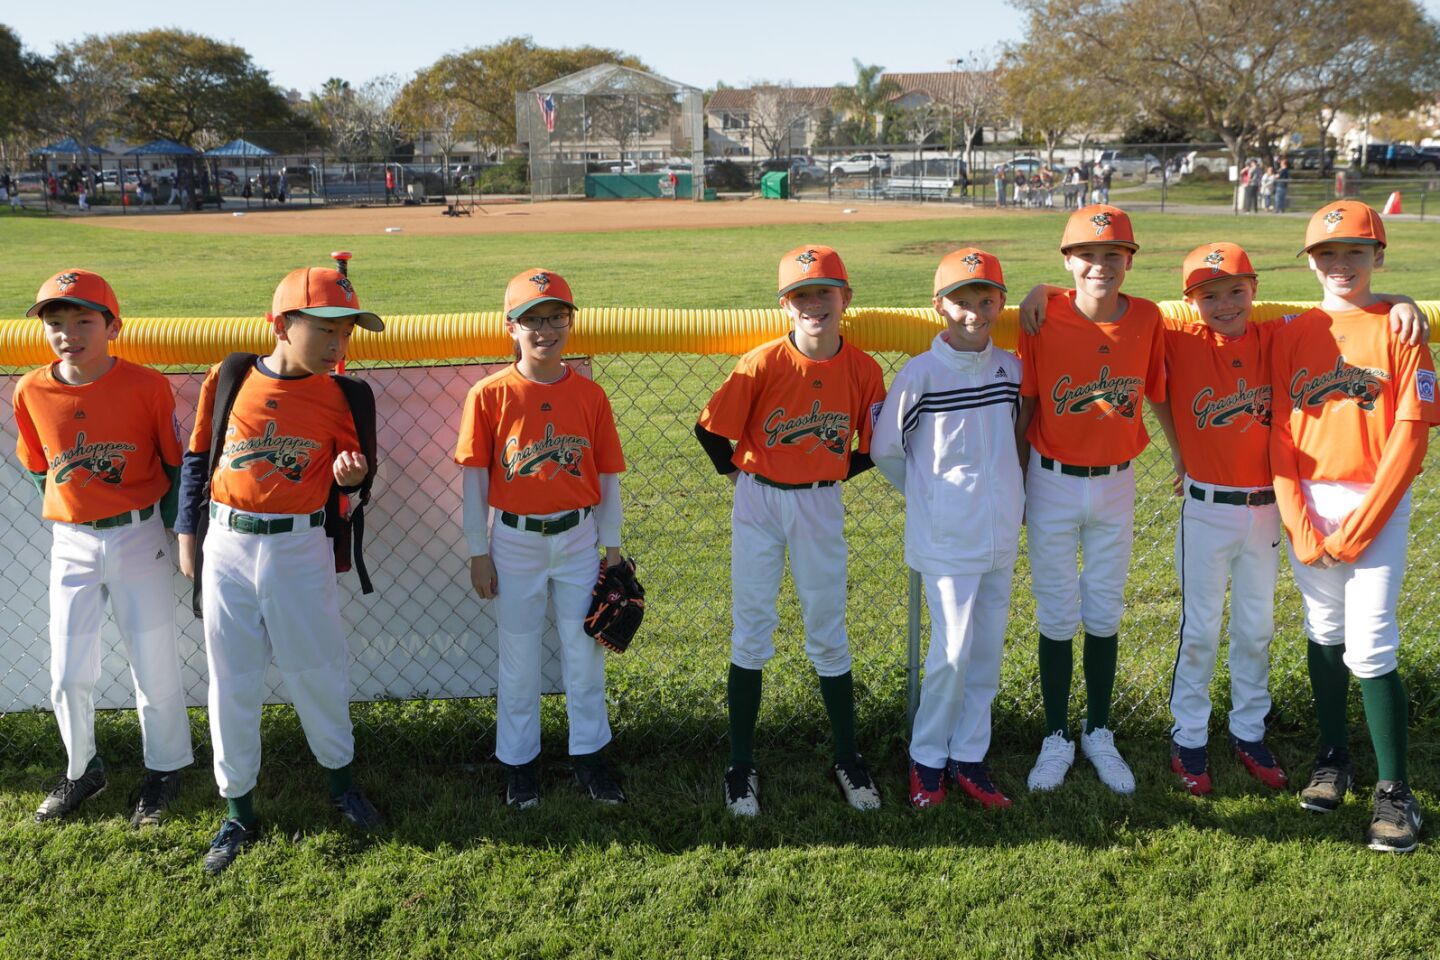 Grasshoppers at the Del Mar Little League Opening Day